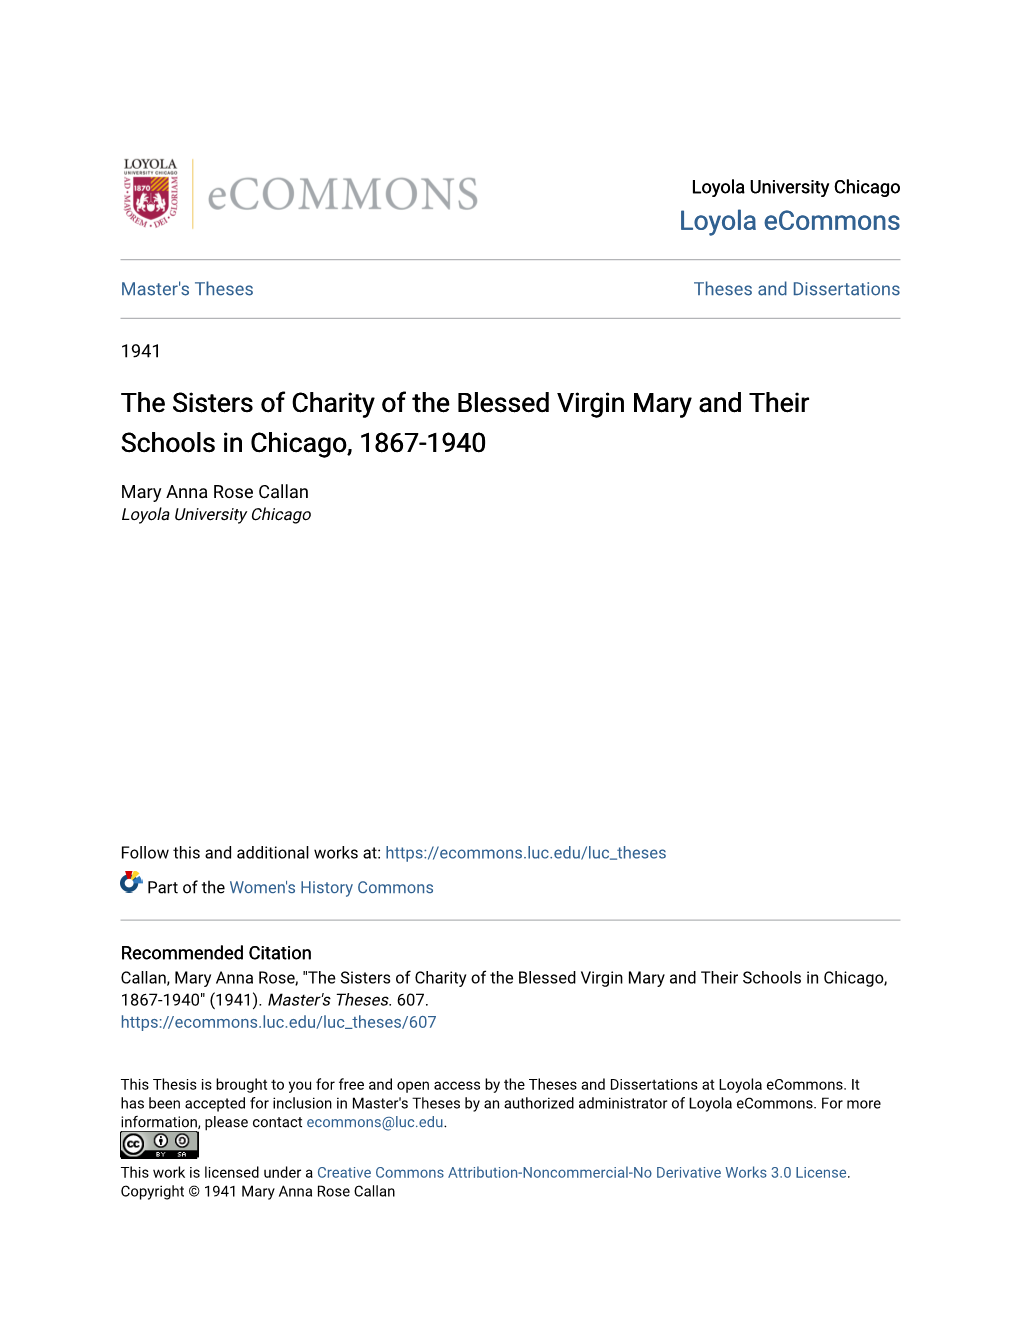 The Sisters of Charity of the Blessed Virgin Mary and Their Schools in Chicago, 1867-1940